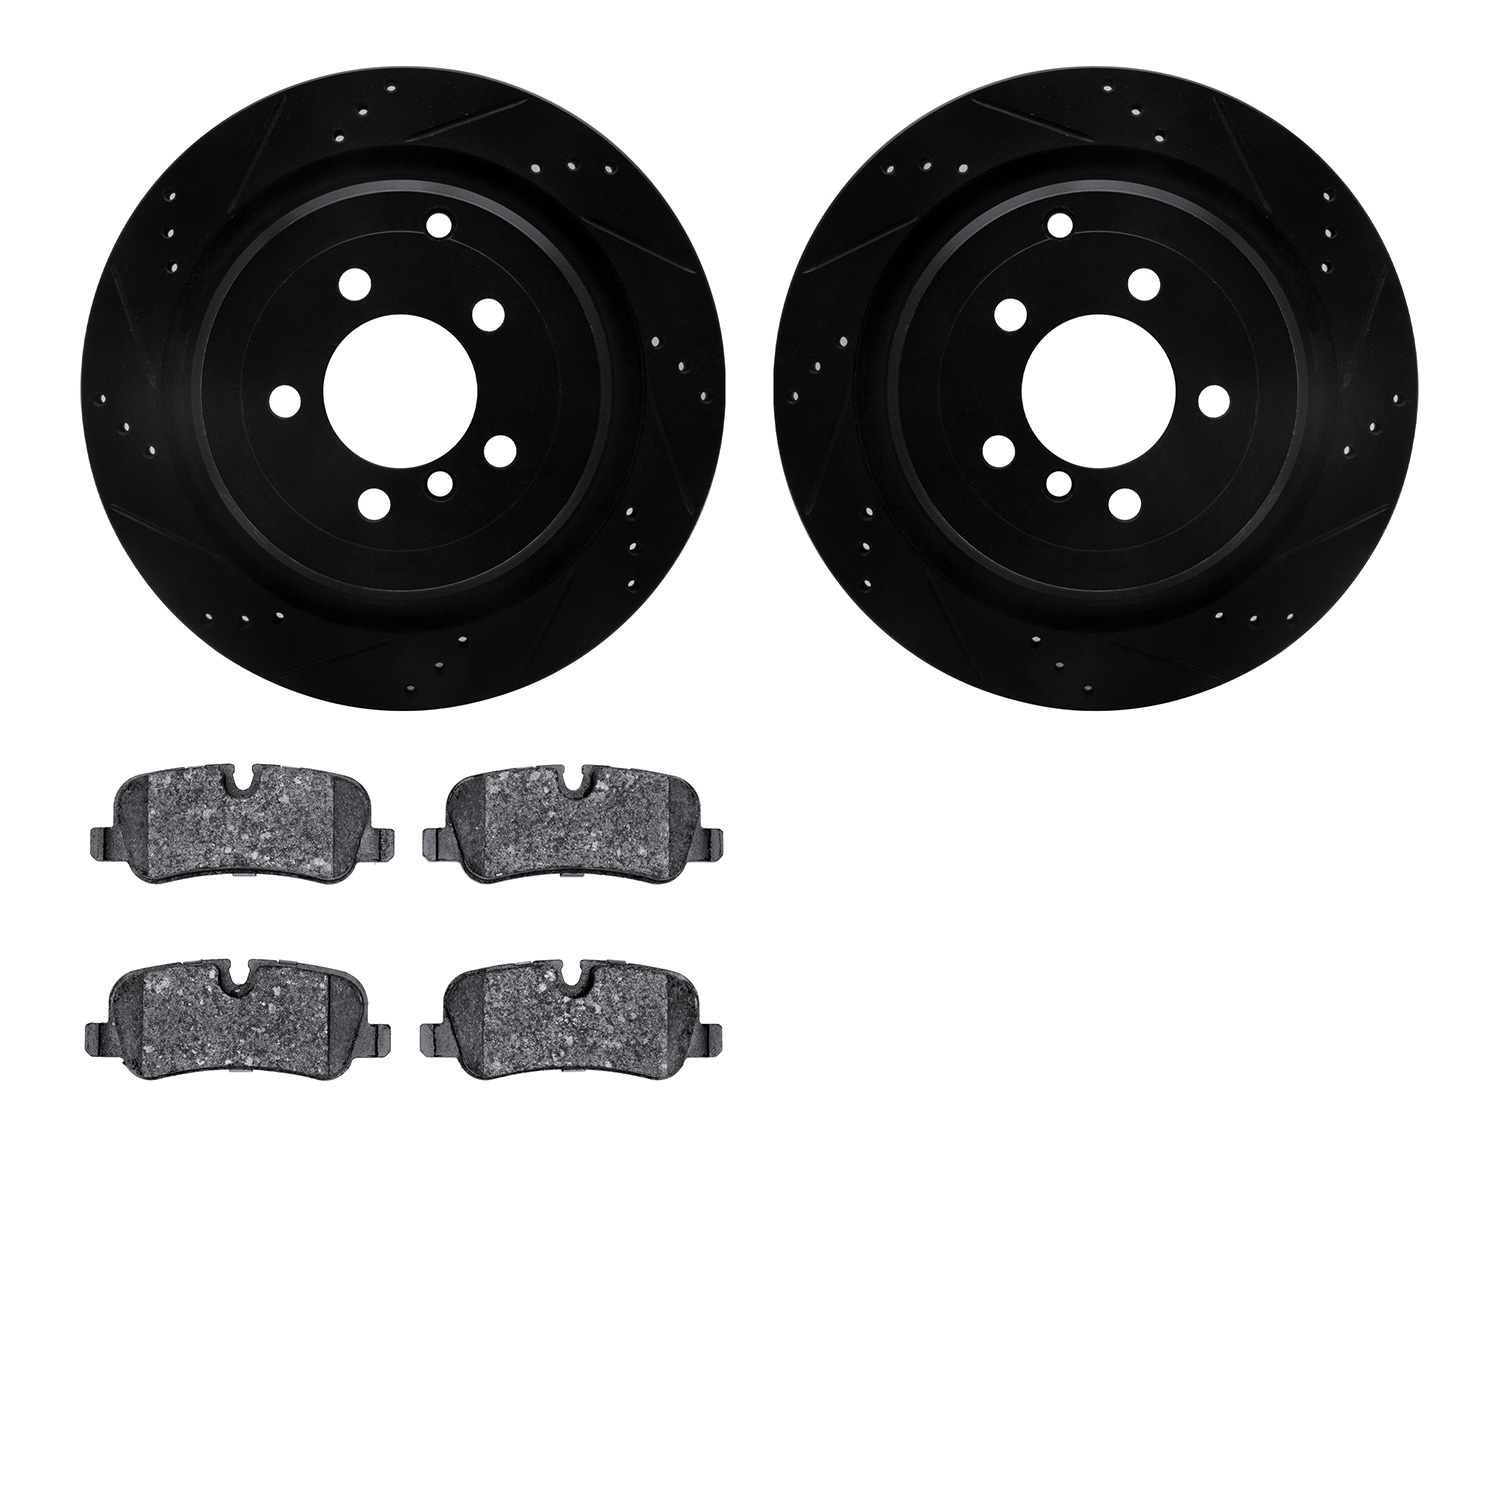 8302-11017 Drilled/Slotted Brake Rotors with 3000-Series Ceramic Brake Pads Kit [Black], 2006-2012 Land Rover, Position: Rear